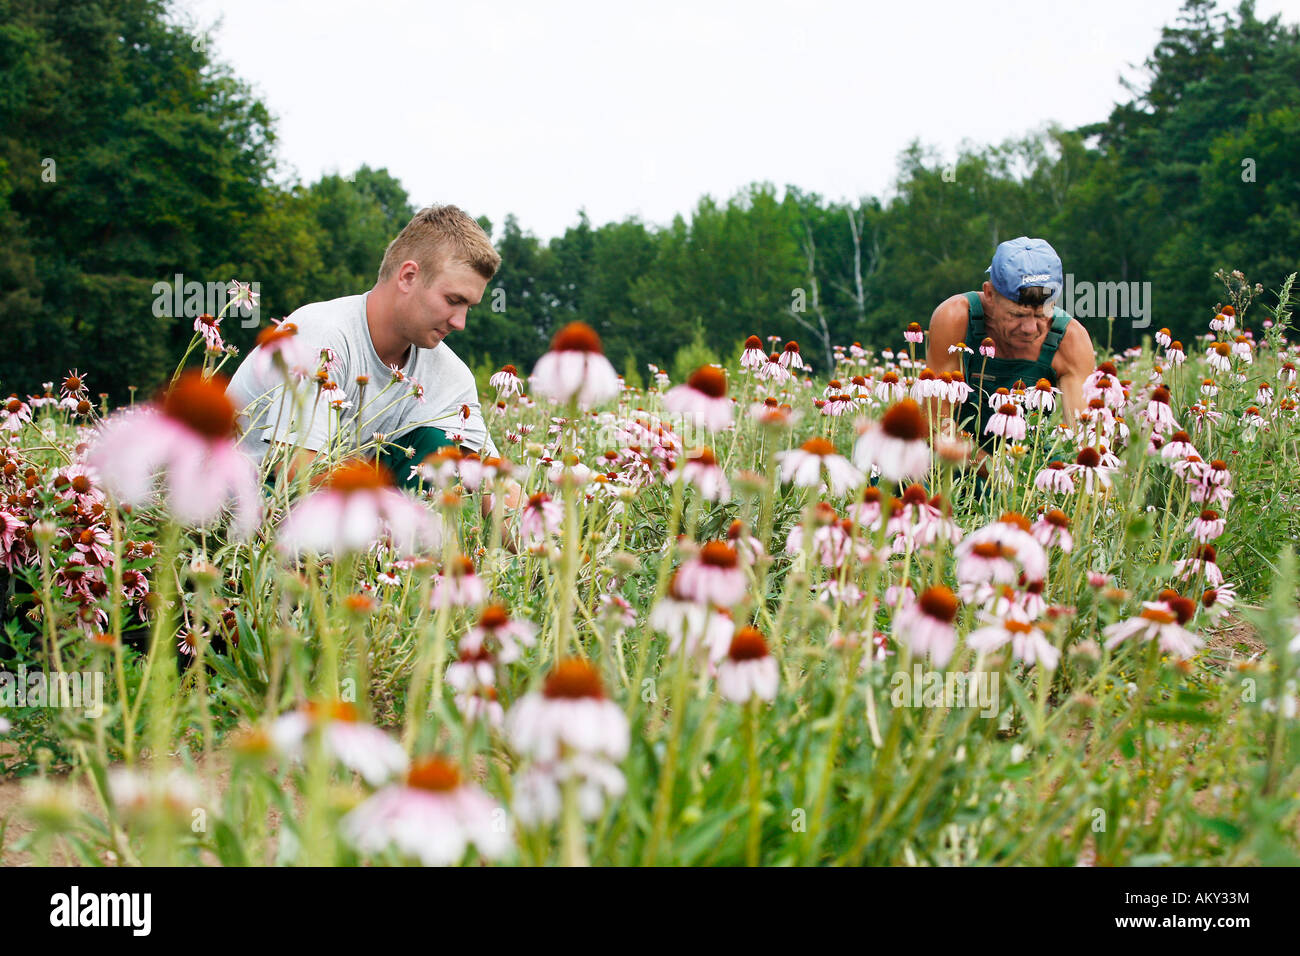 Harvesting Echinacea Angustifolia for the production of remedies, Ansbach, Bavaria, Germany Stock Photo